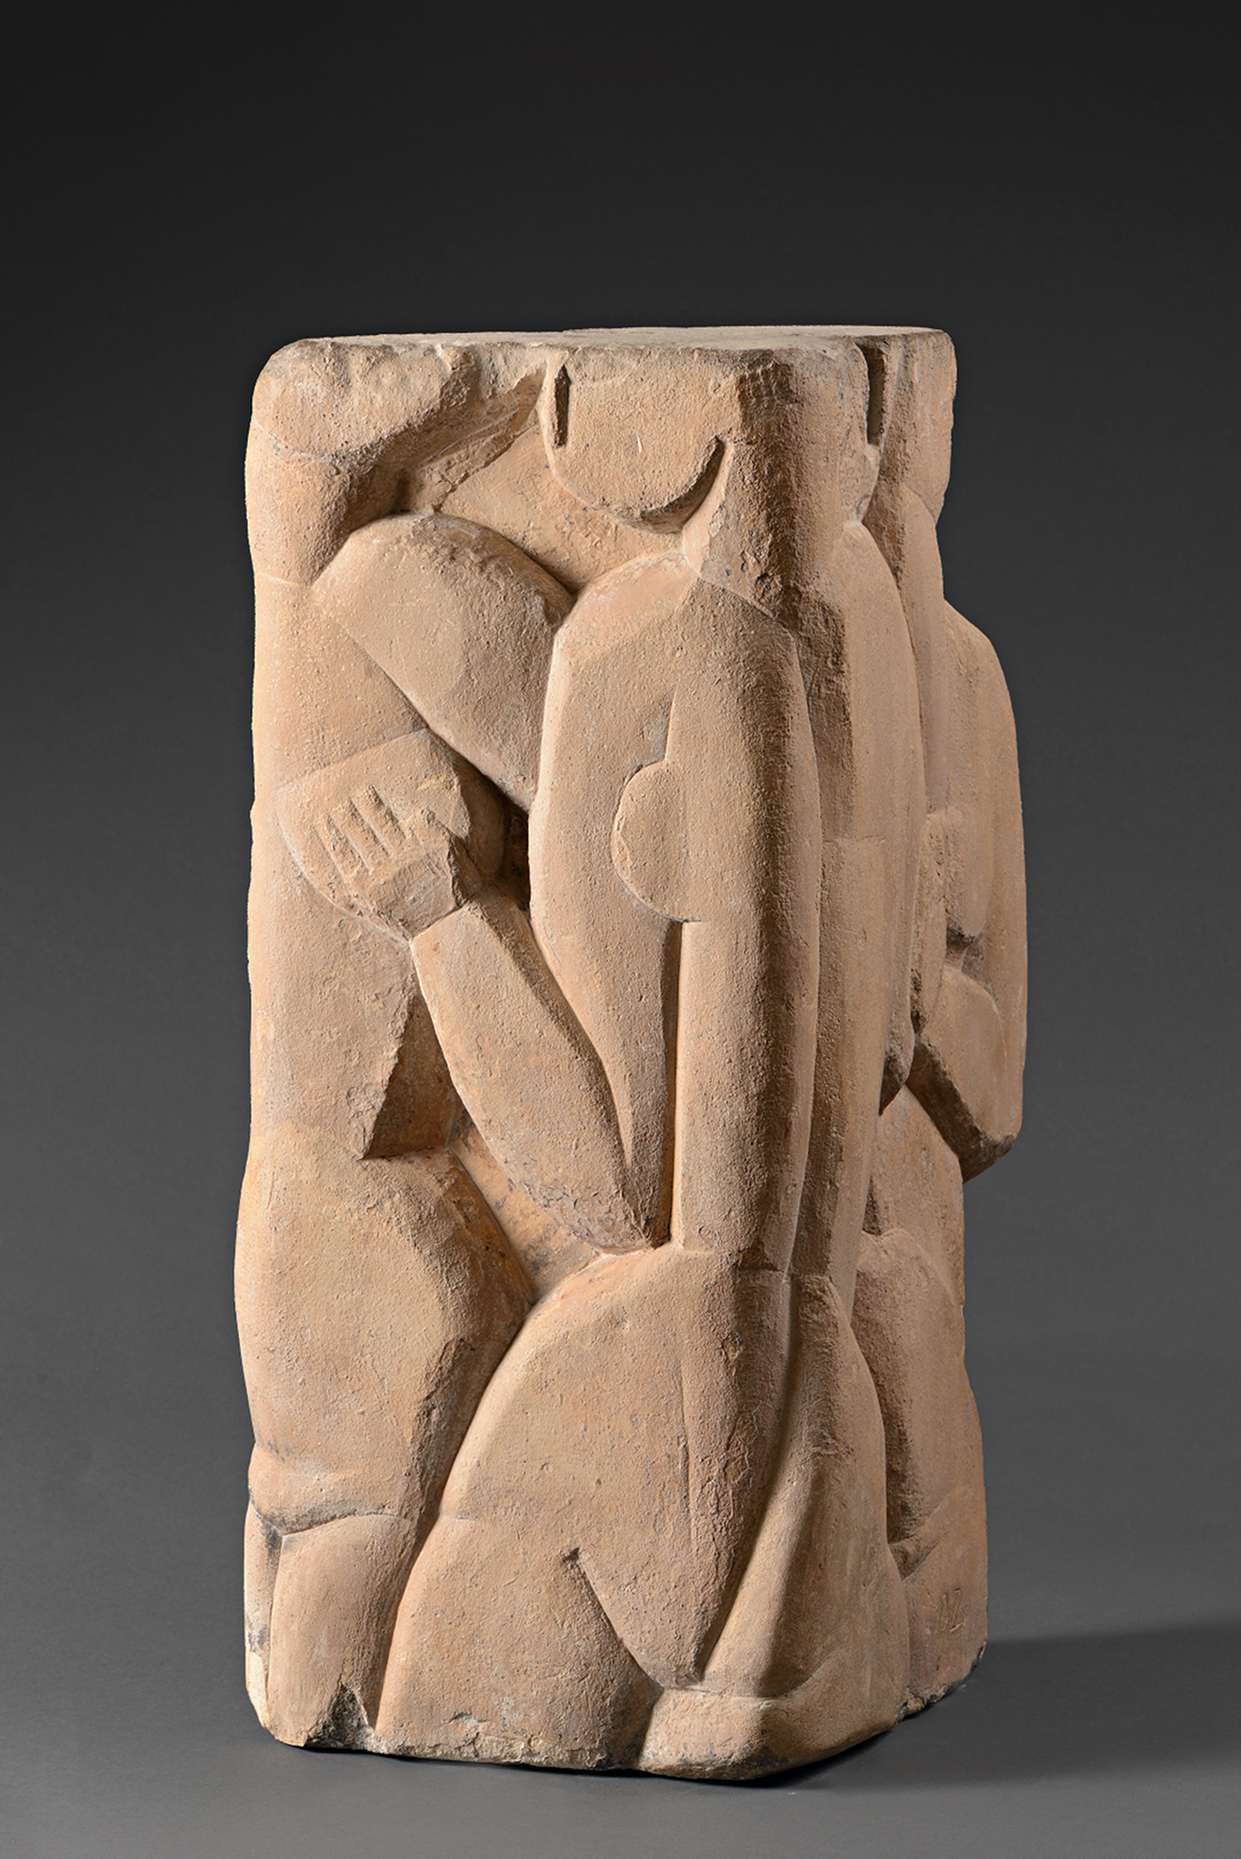 Ossip Zadkine (Russian-French, 1890-1967) Groupe of figures, 1921 ...